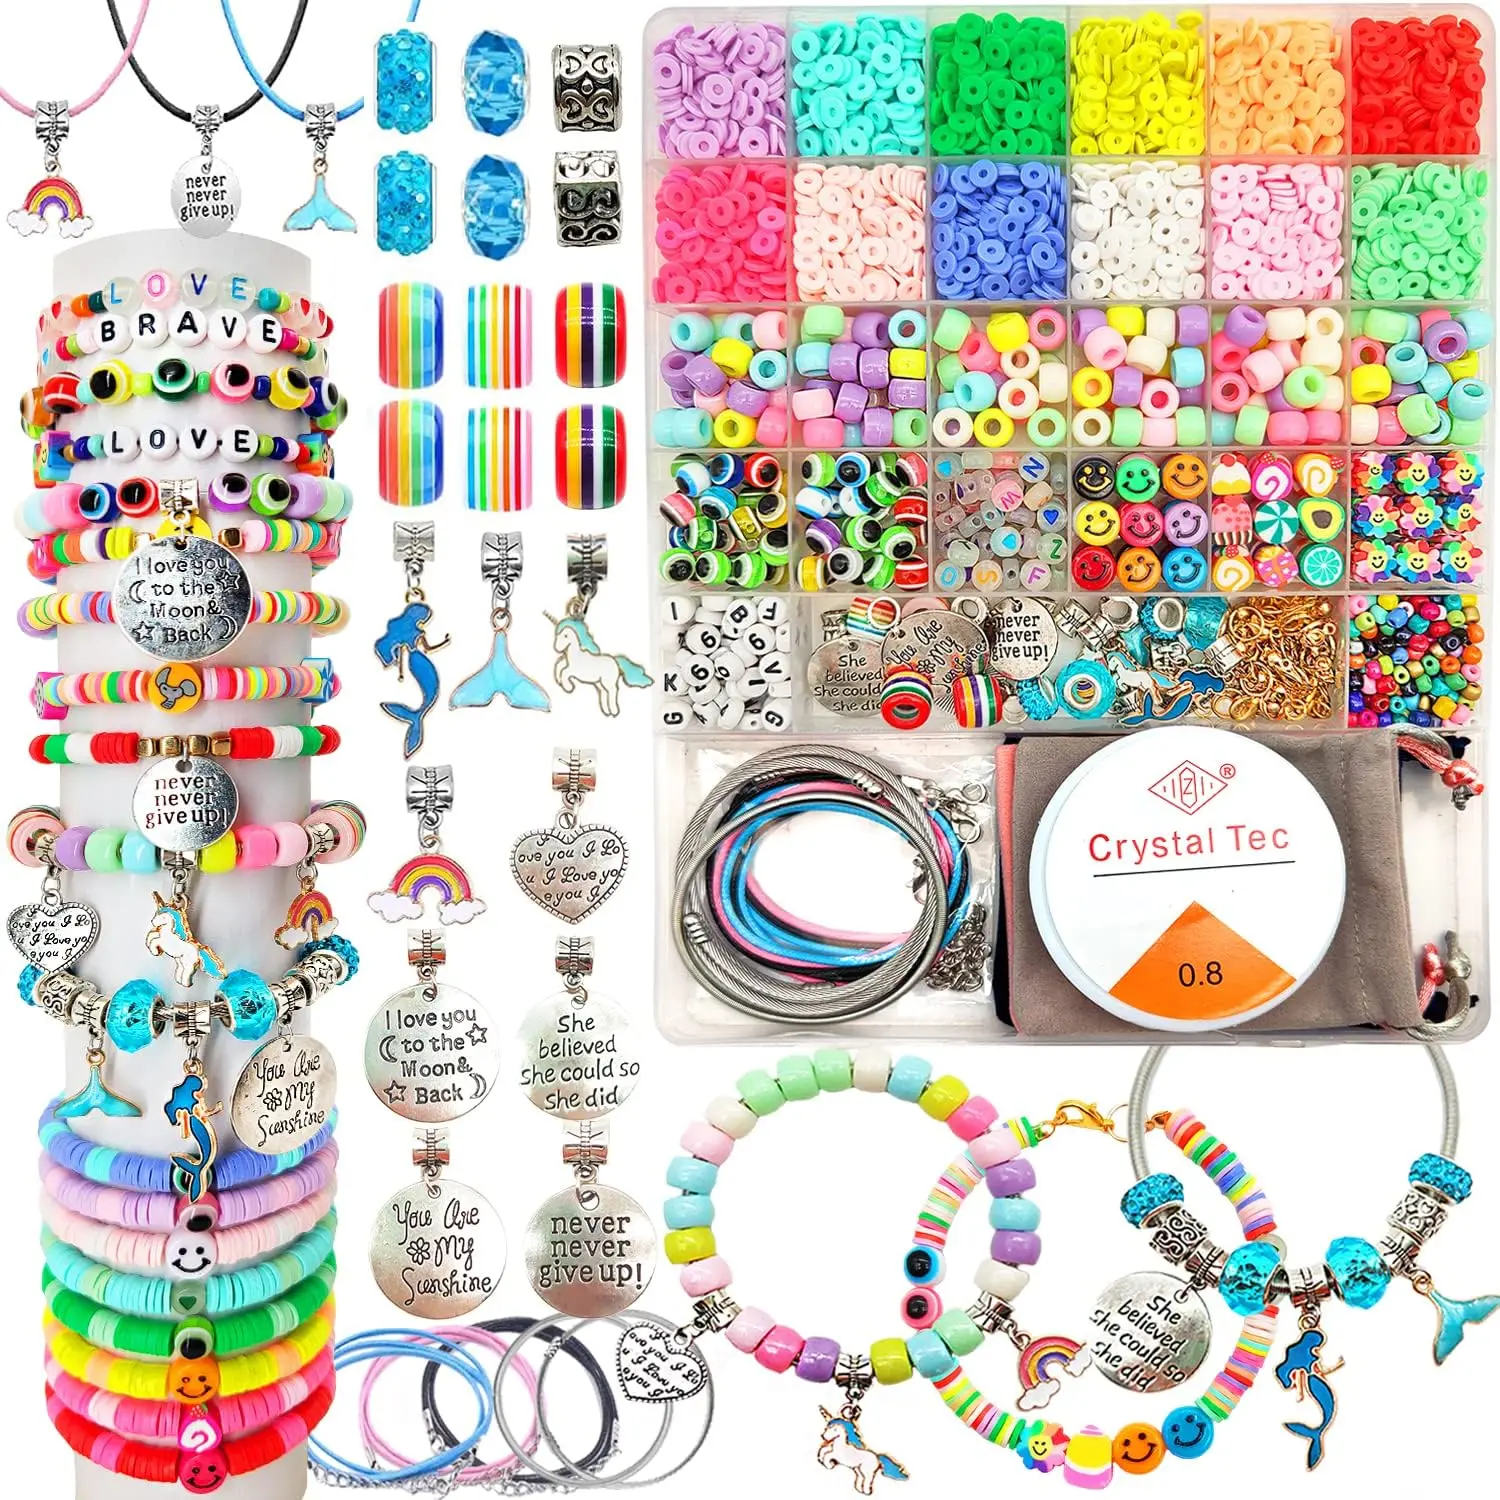 Toys Bracelet Making Kit -3100pcs Beads for Charm Jewelry Making Kit Supplies DIY Arts Halloween and Christmas Party